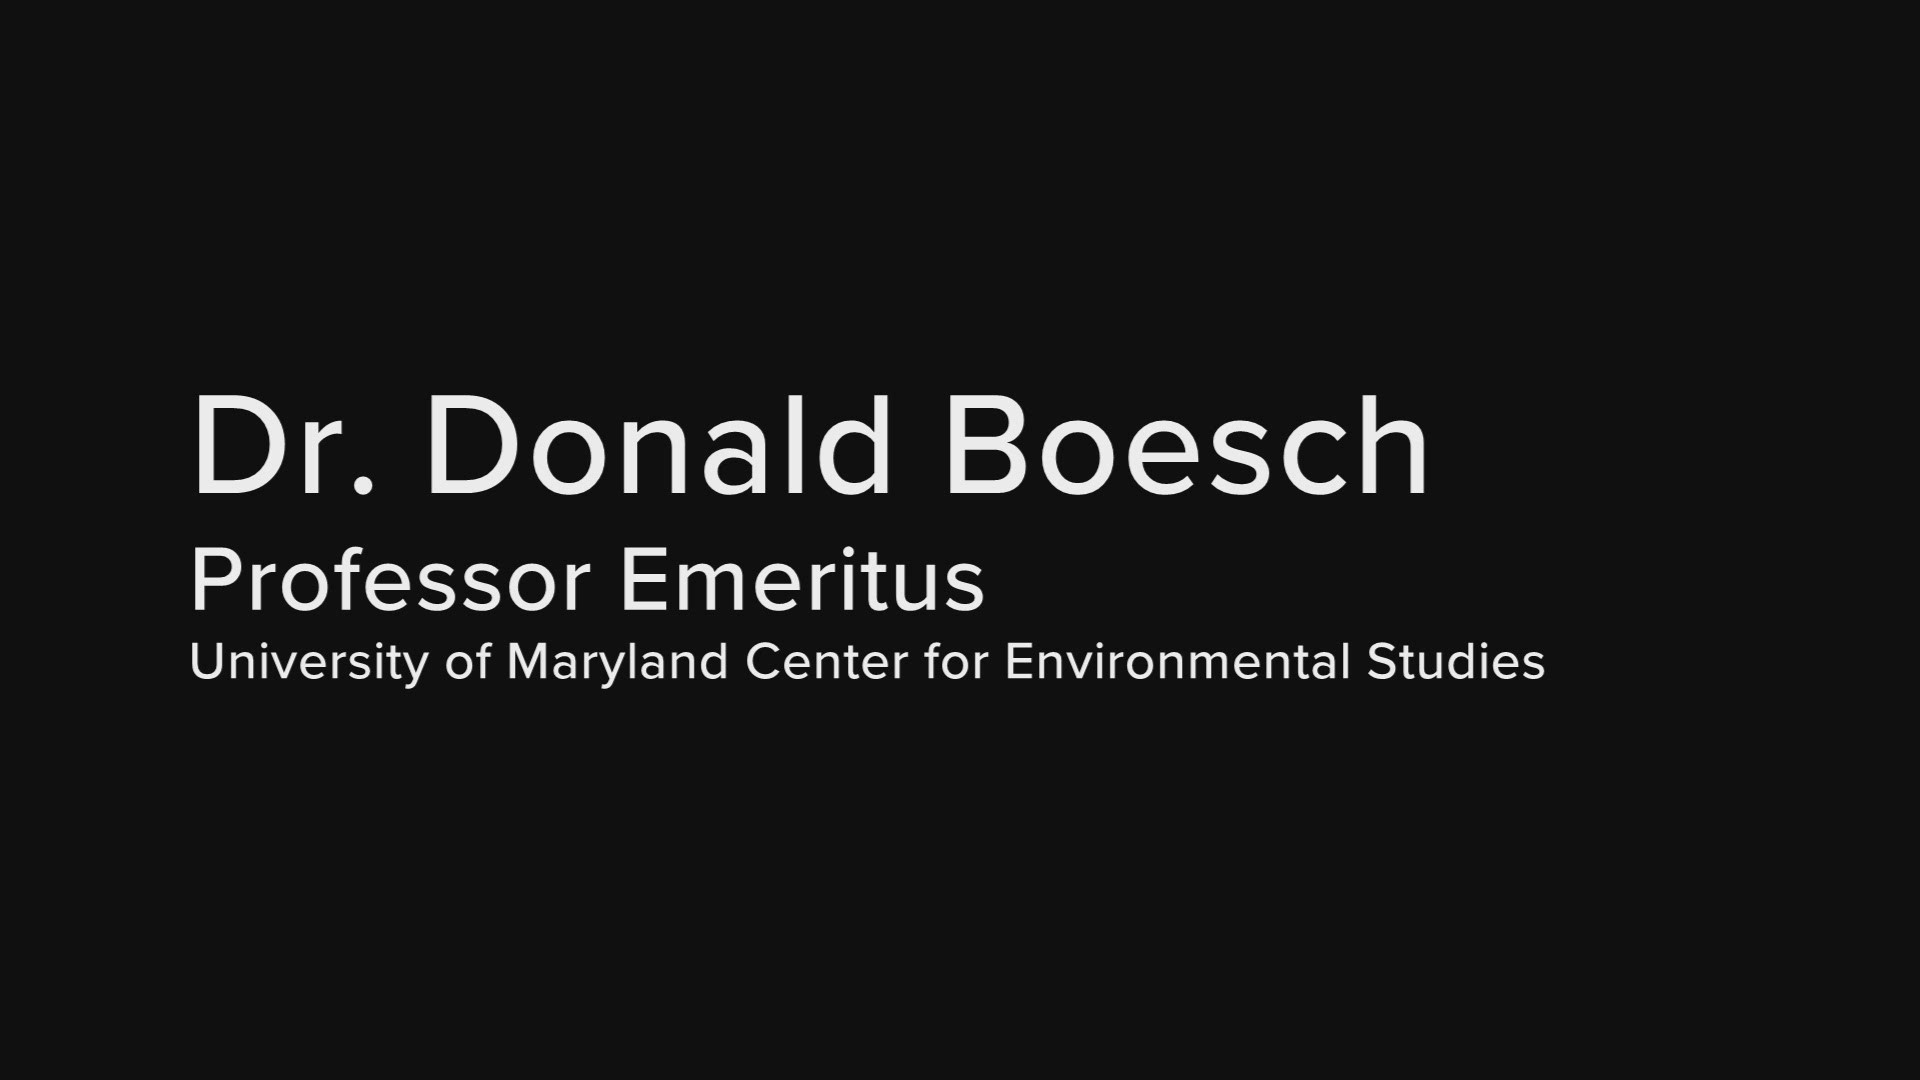 Dr. Donald Boesch, professor emeritus at the University of Maryland Ctr. for Environmental Science, explains how the Biden administration may tackle climate change.